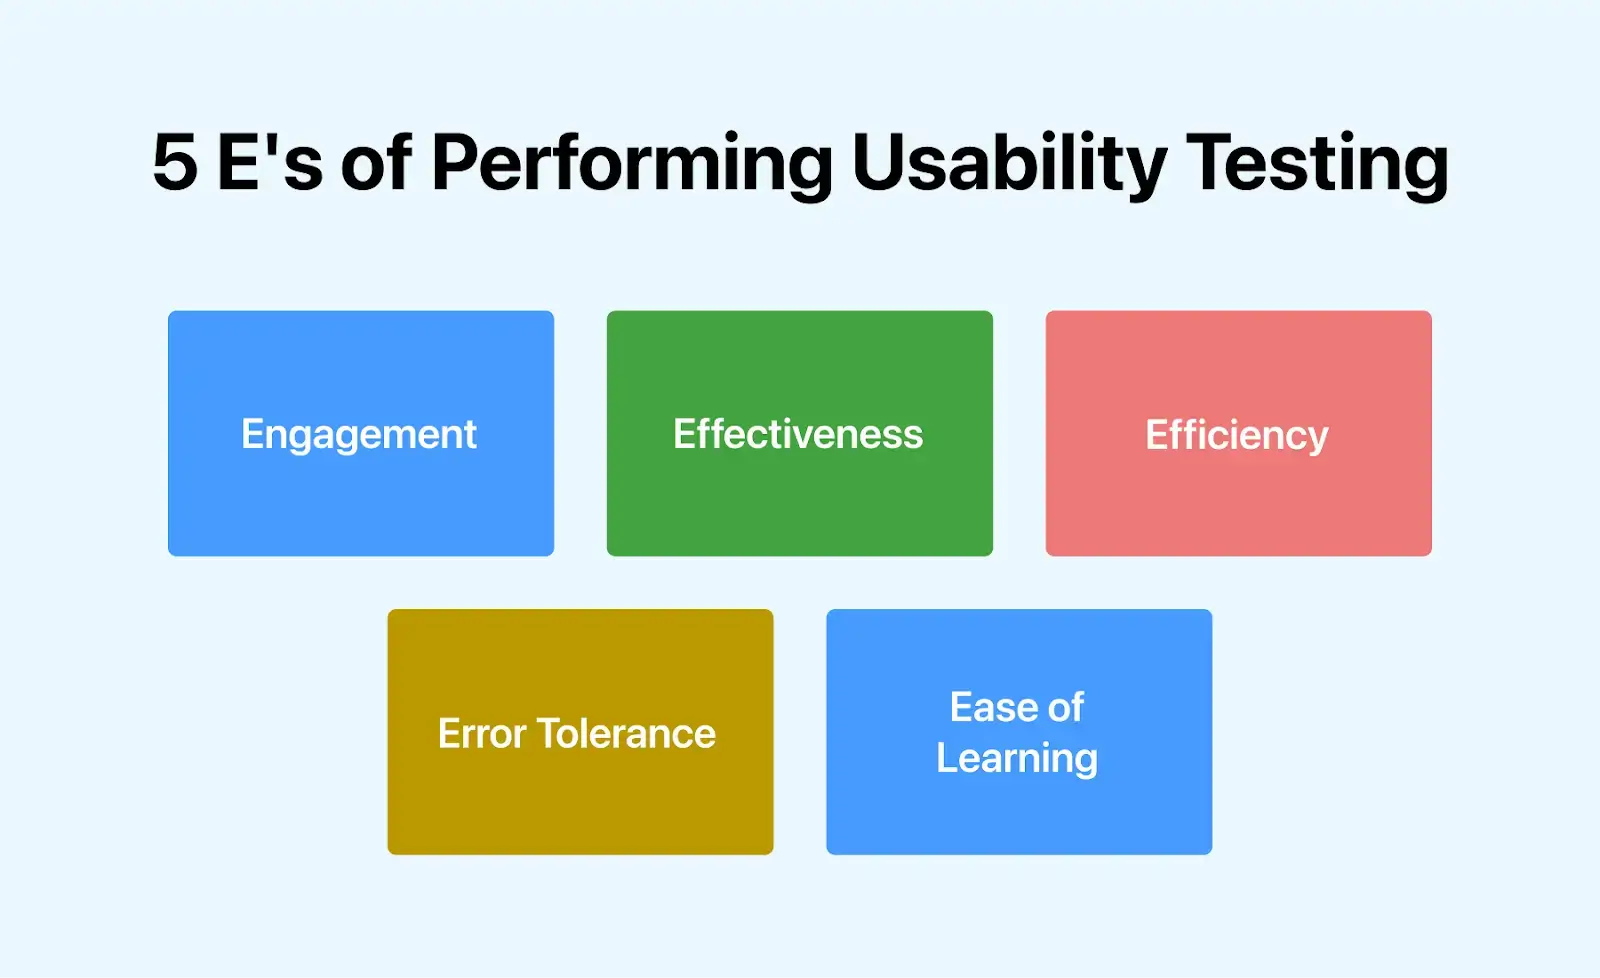 5 E's of Performing Usability Testing